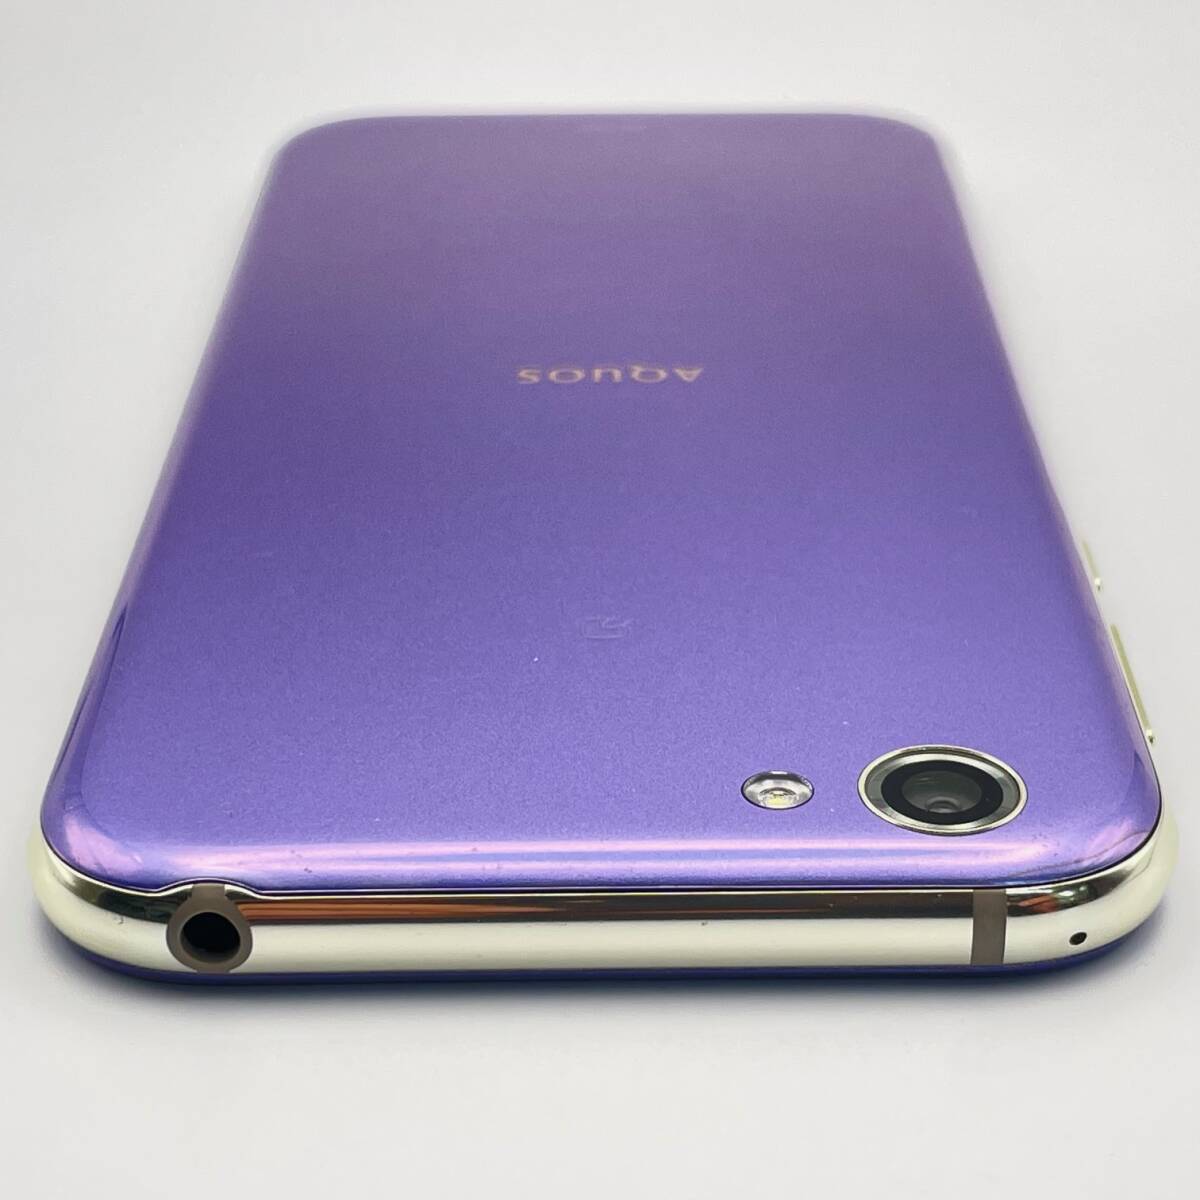  secondhand goods sharp AQUOS R SH-03J Crystal Lavender Android smart phone 1 jpy from selling out 